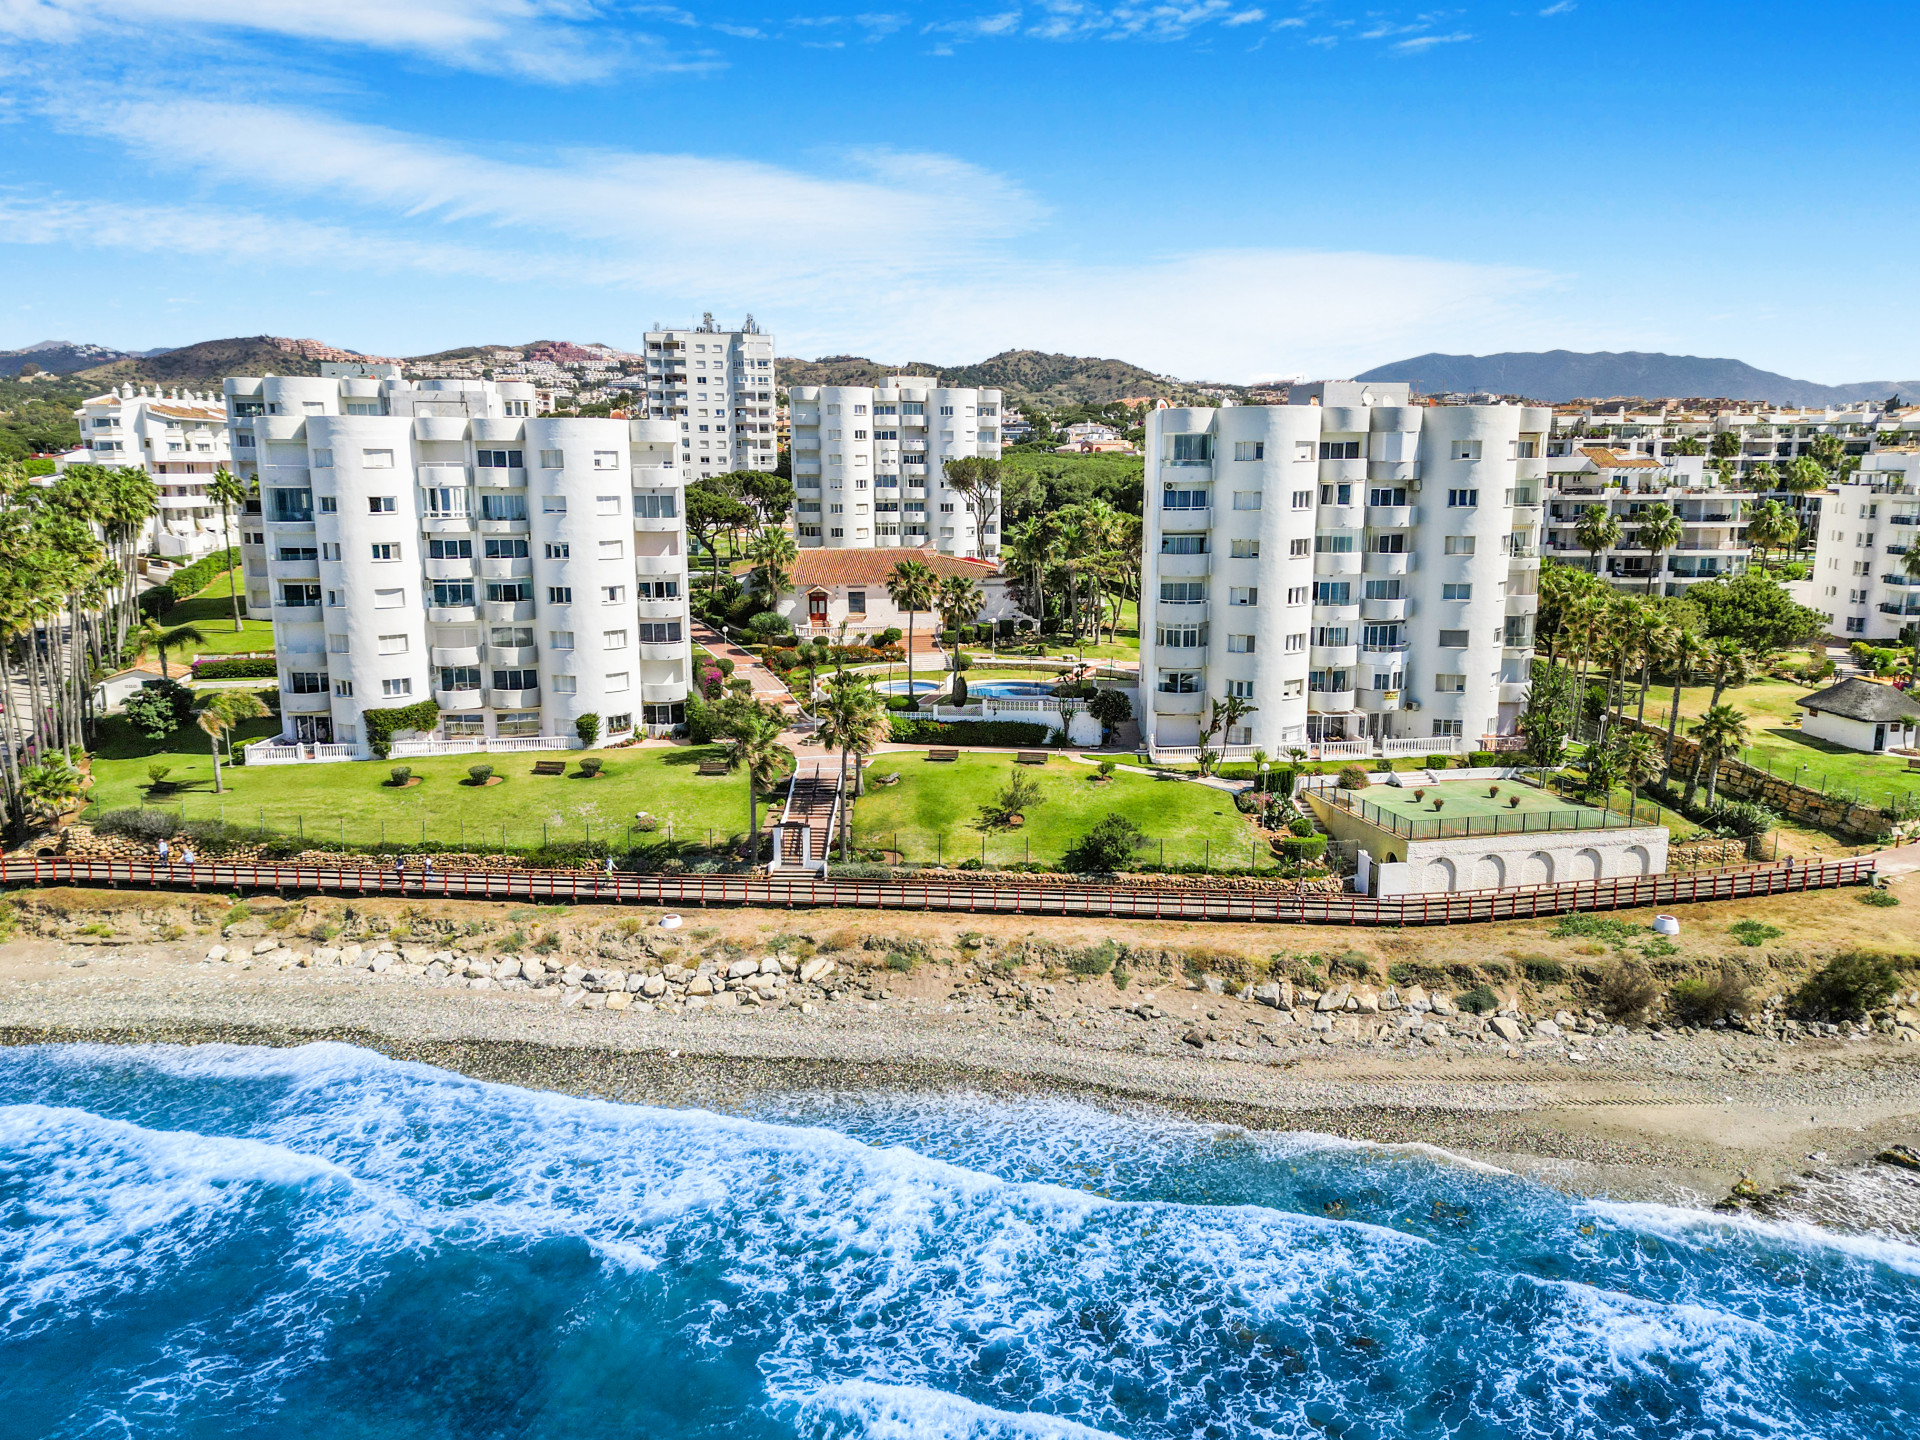 Incredible investment opportunity - seven independent ground floor apartments in a frontline beach community of Calahonda, Mijas Costa